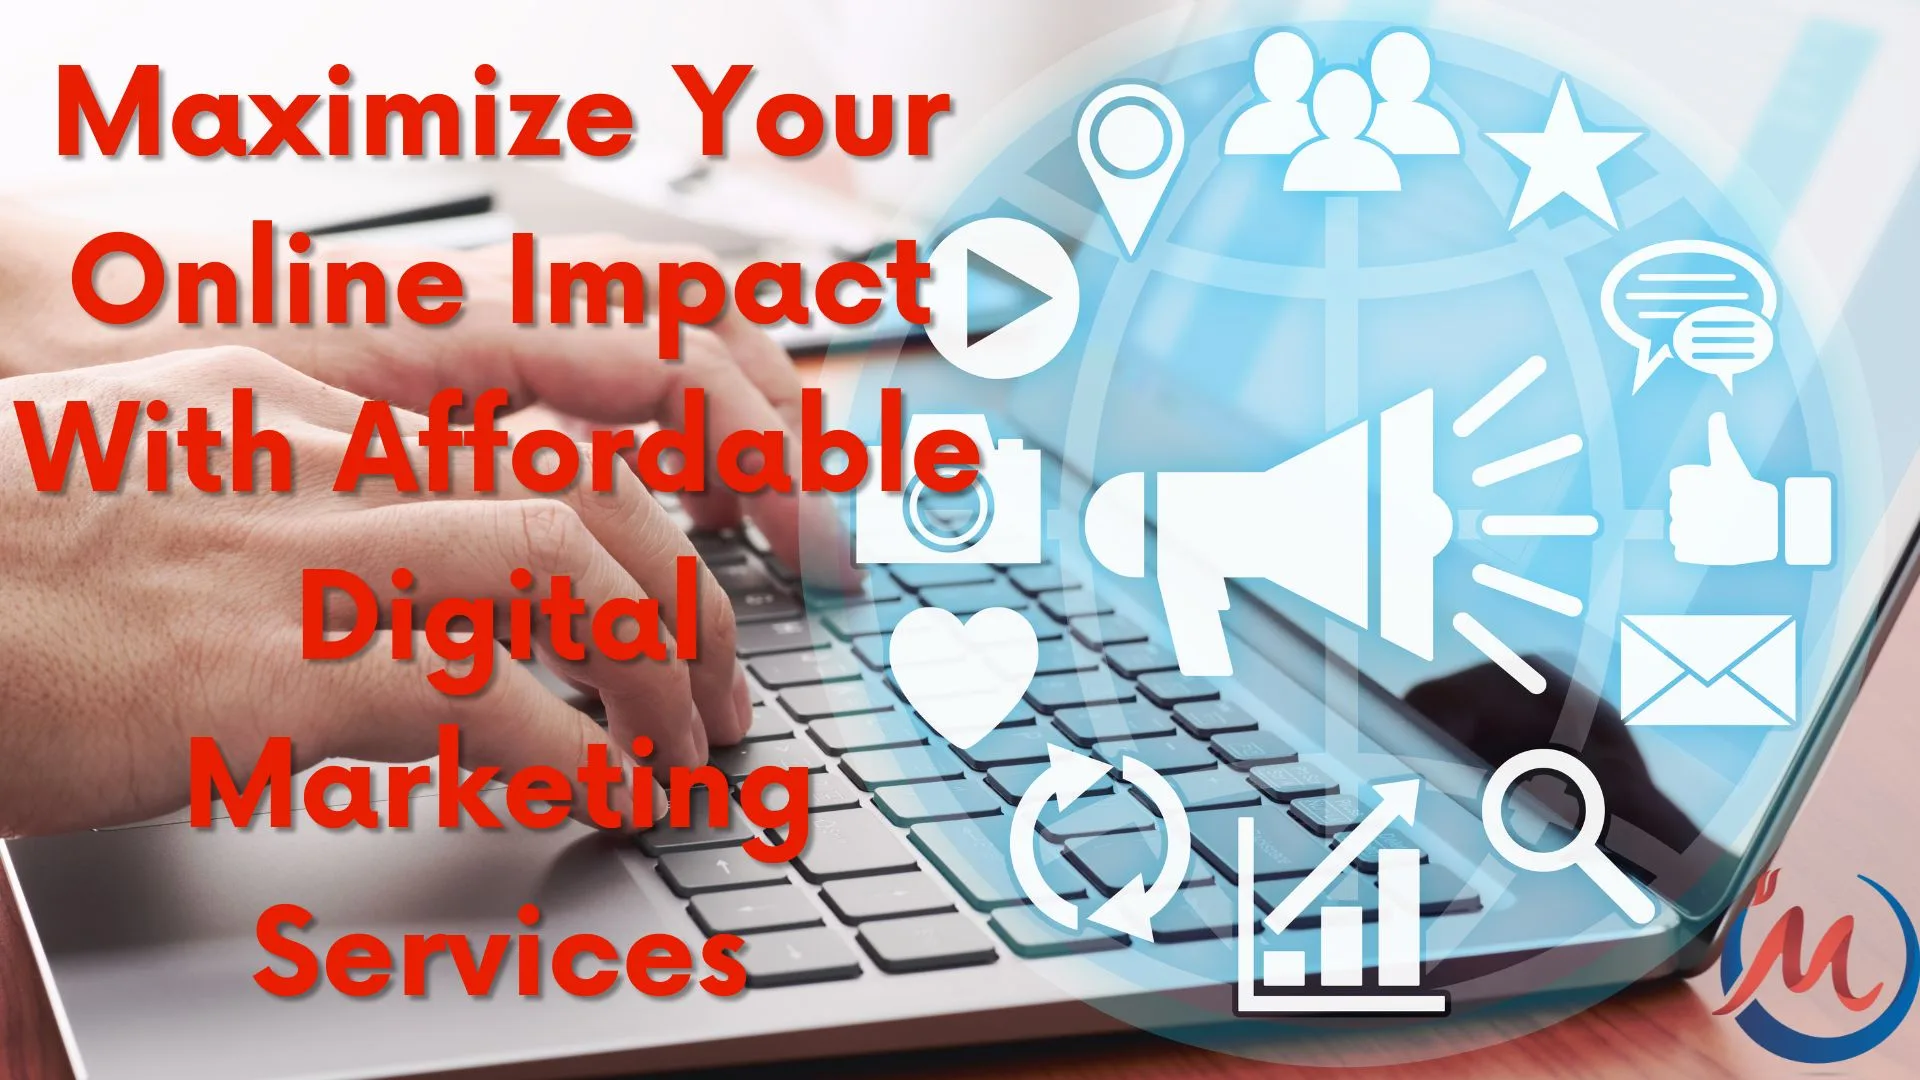 Maximize Your Online Impact With Affordable Digital Marketing Services